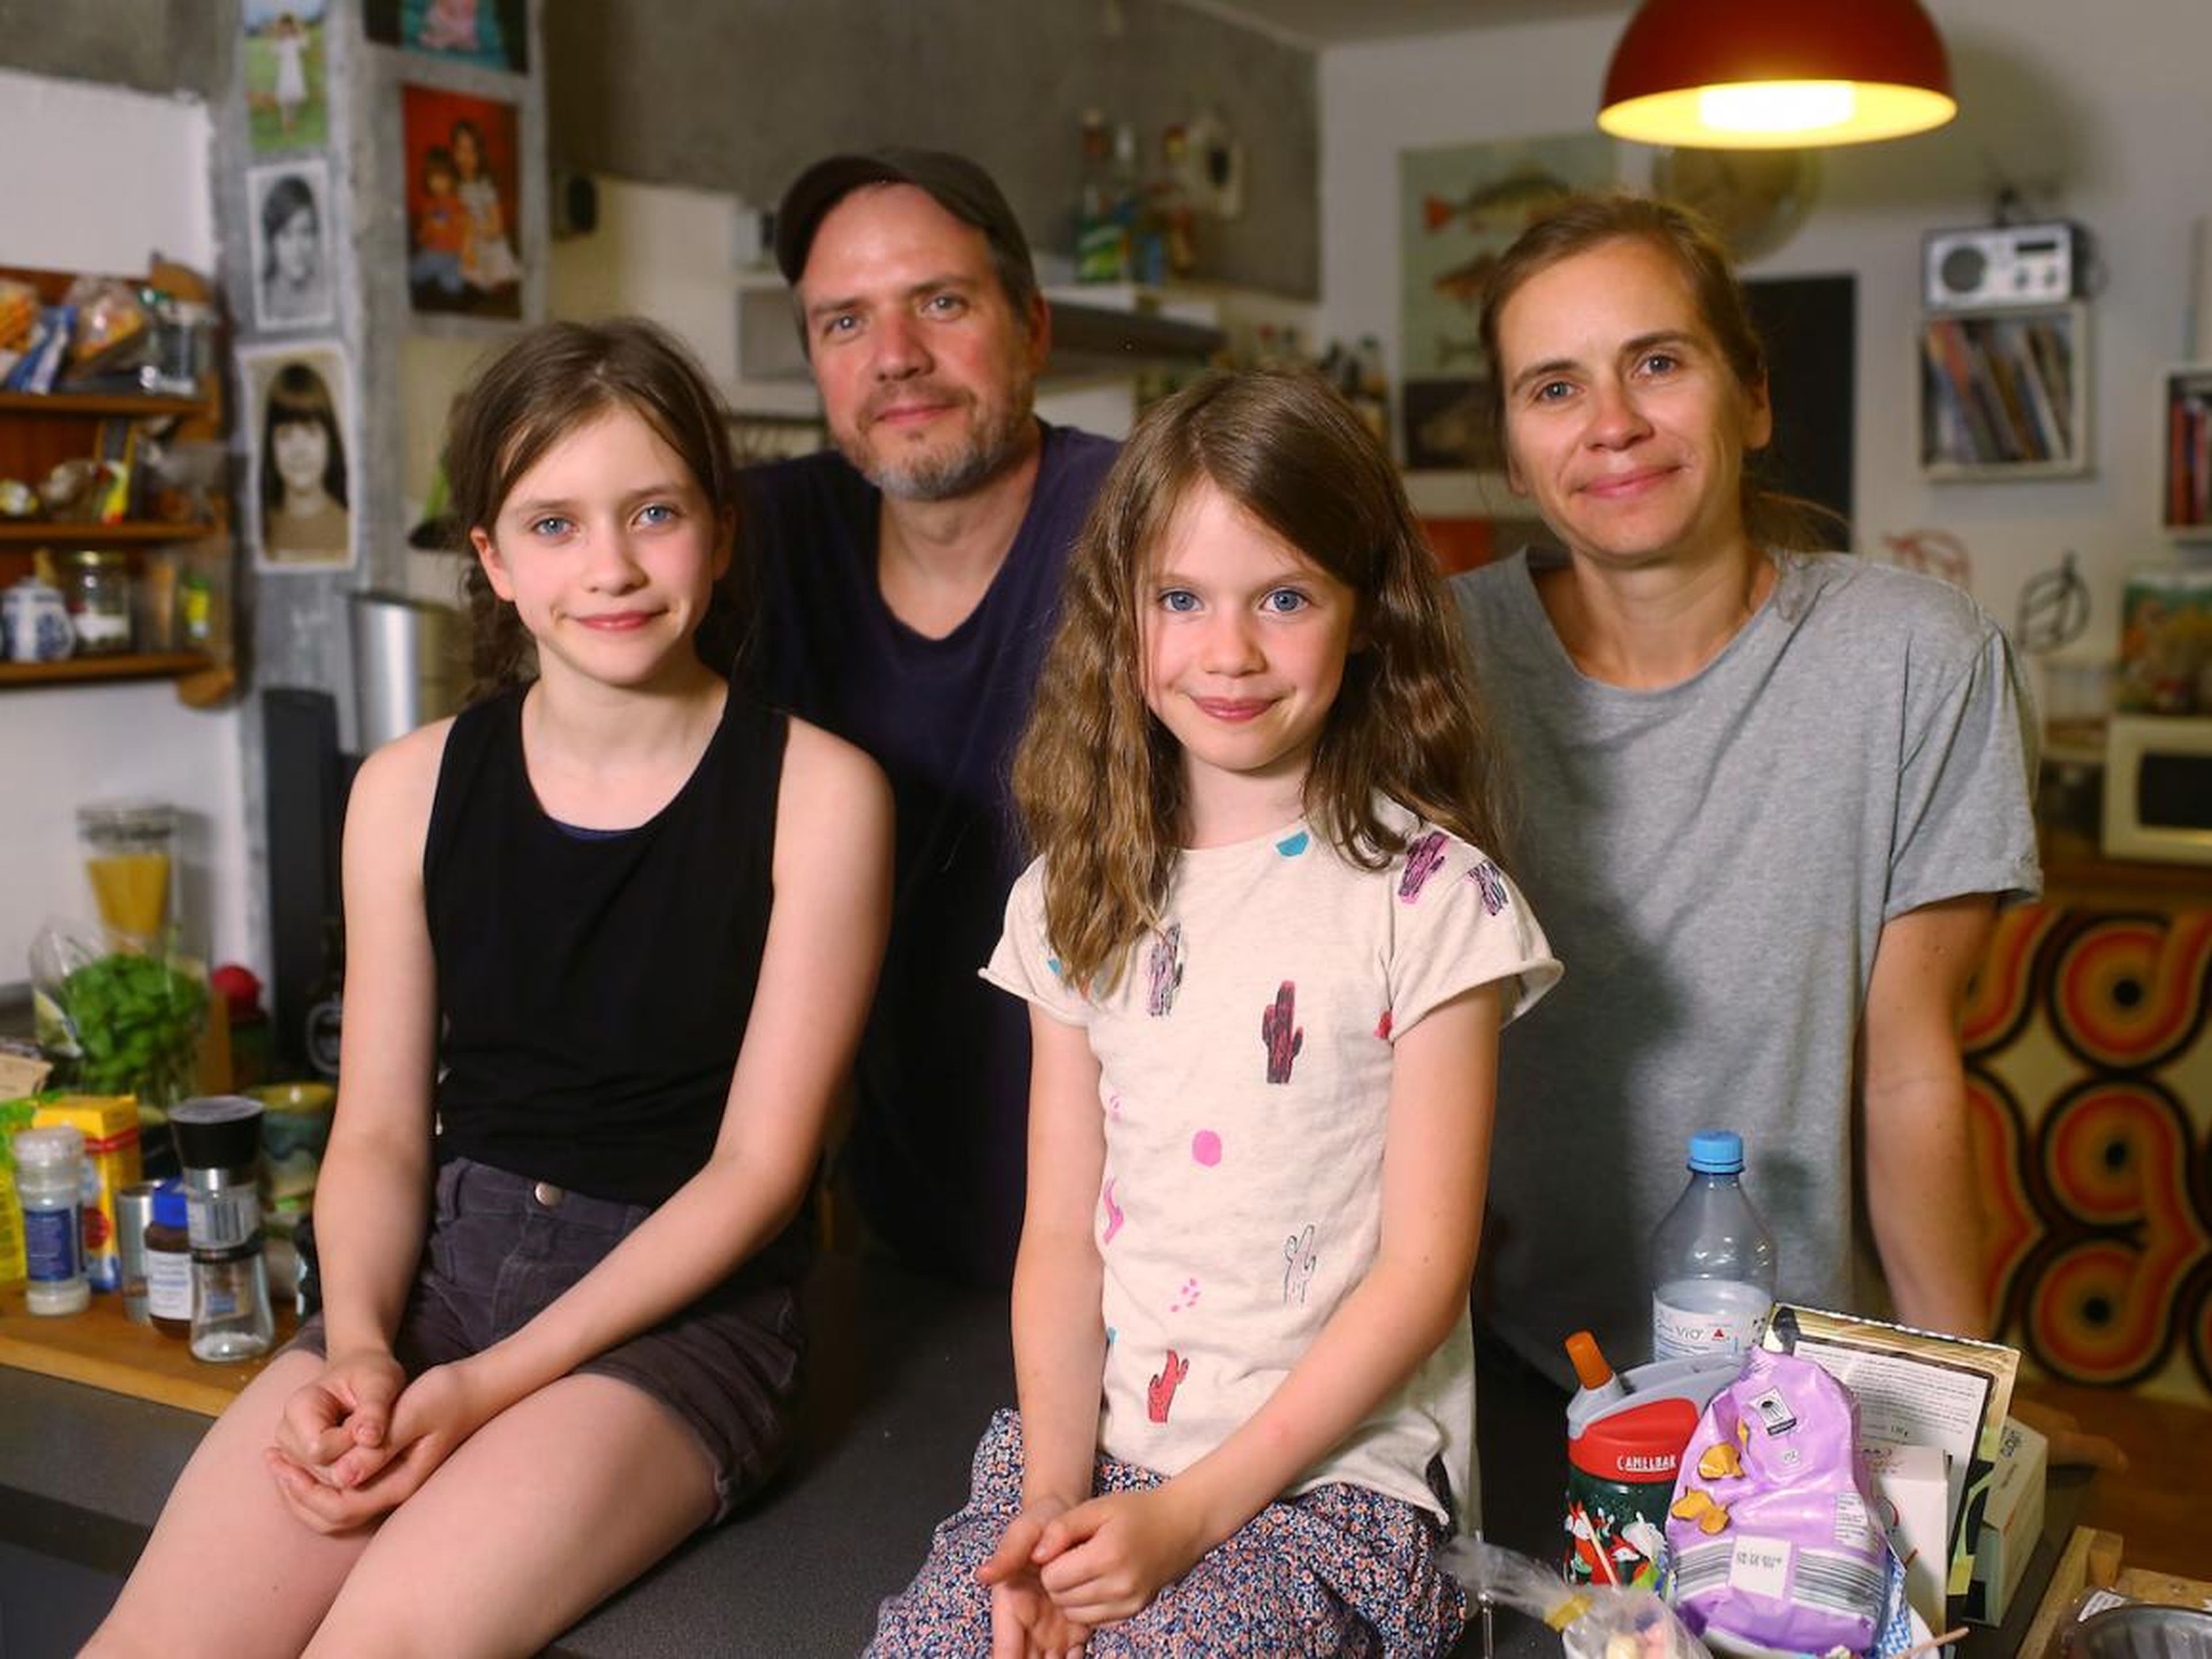 Alexander Raduenz of Berlin, Germany, said he, his wife, and two daughters are trying to lower their carbon footprint as much as possible.